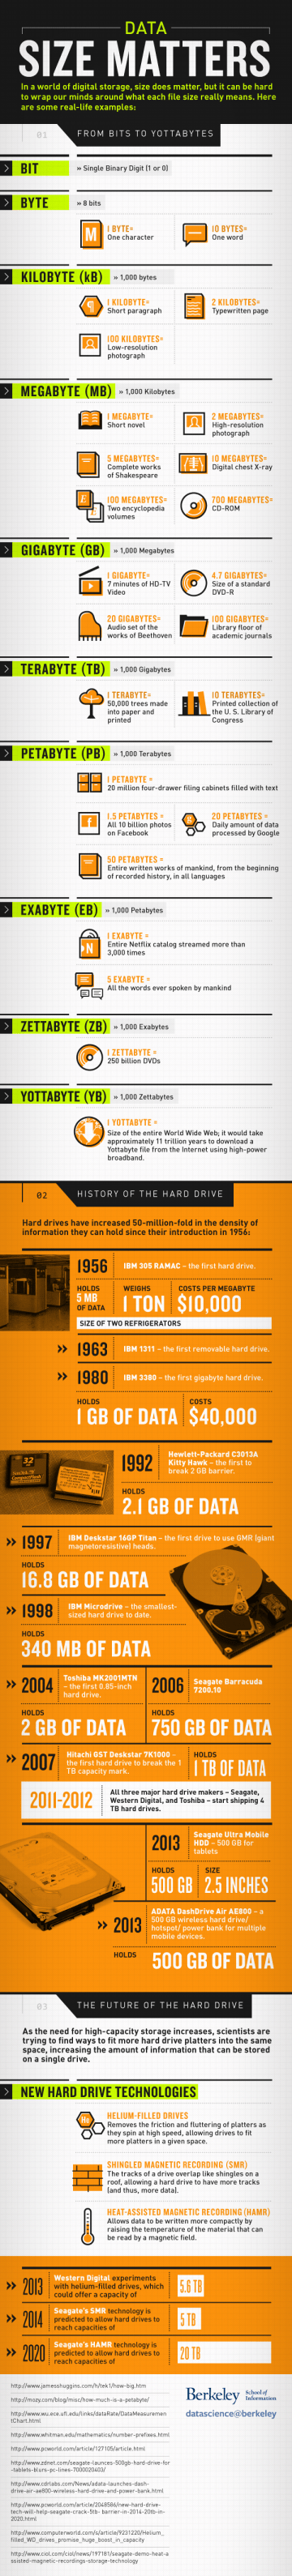 Infographic: Data Size Matters